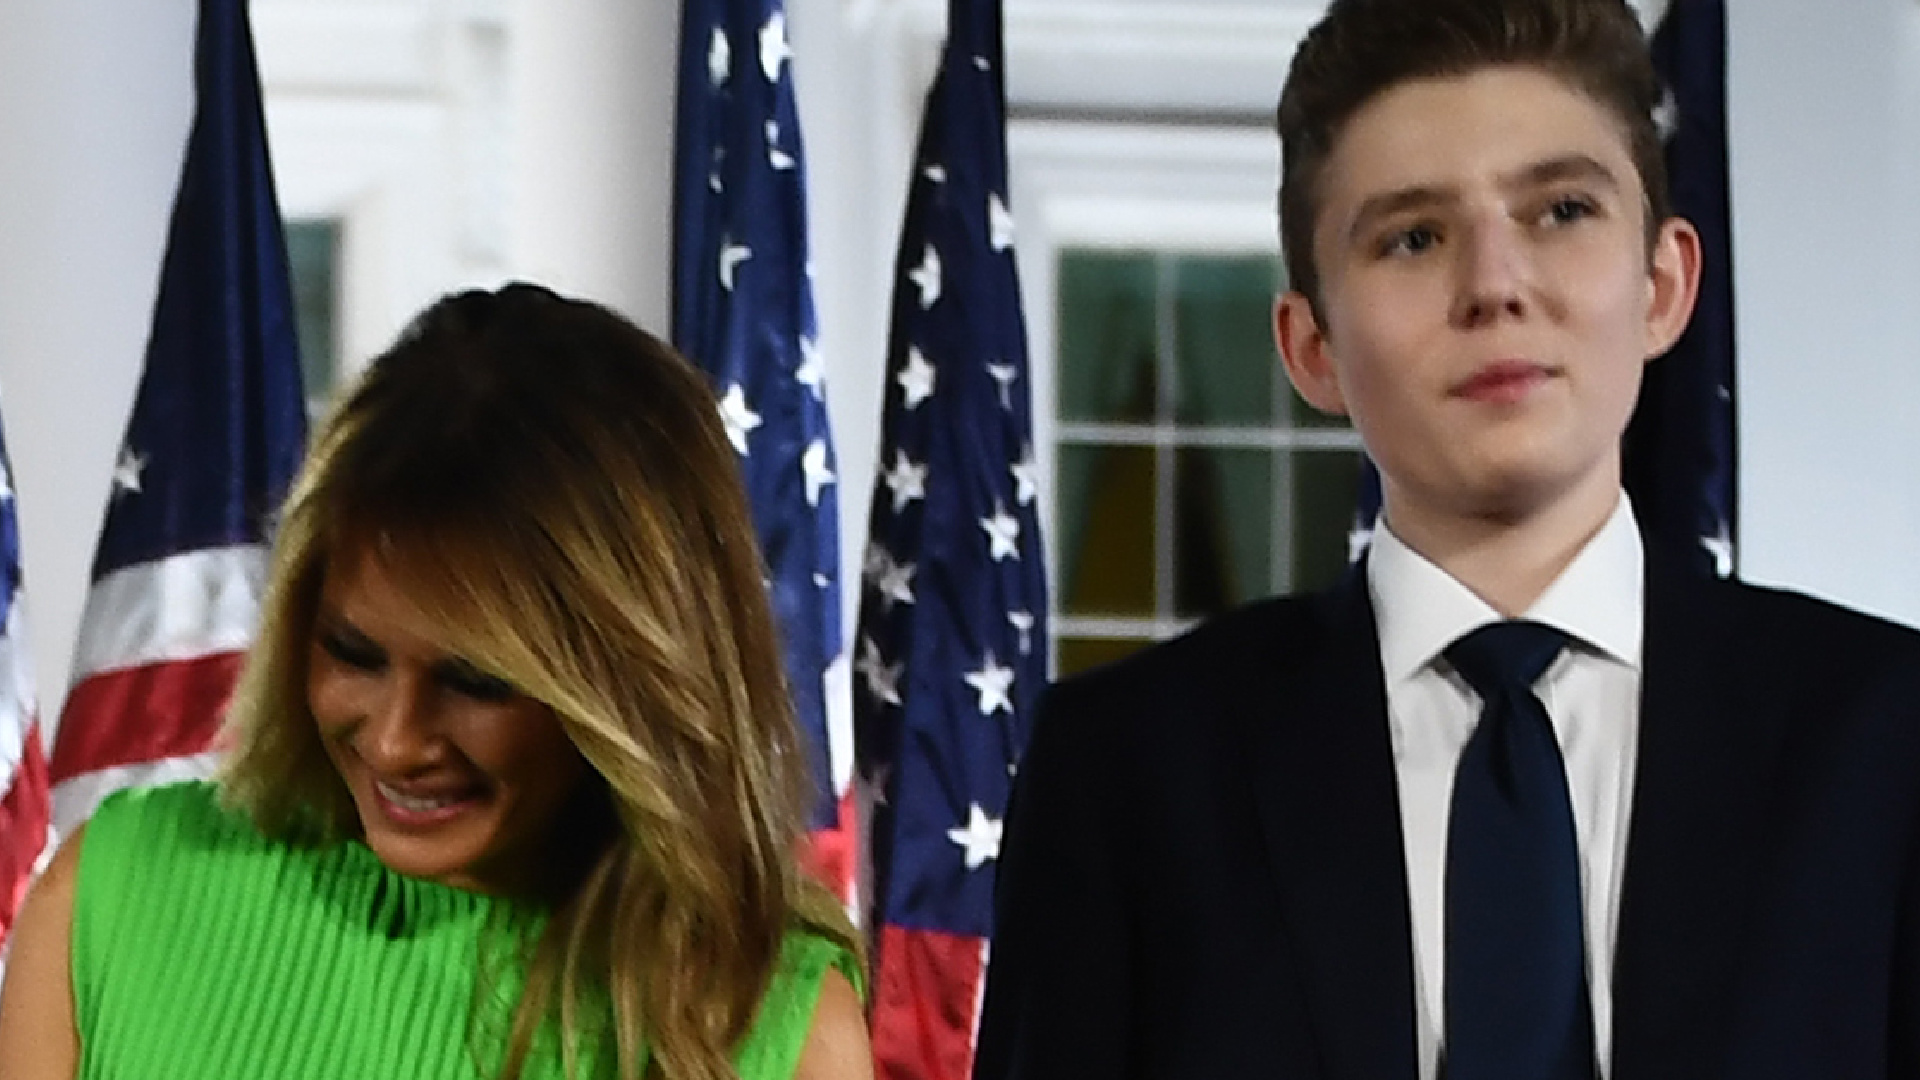 Melania Trump, closely attentive to her son Barron